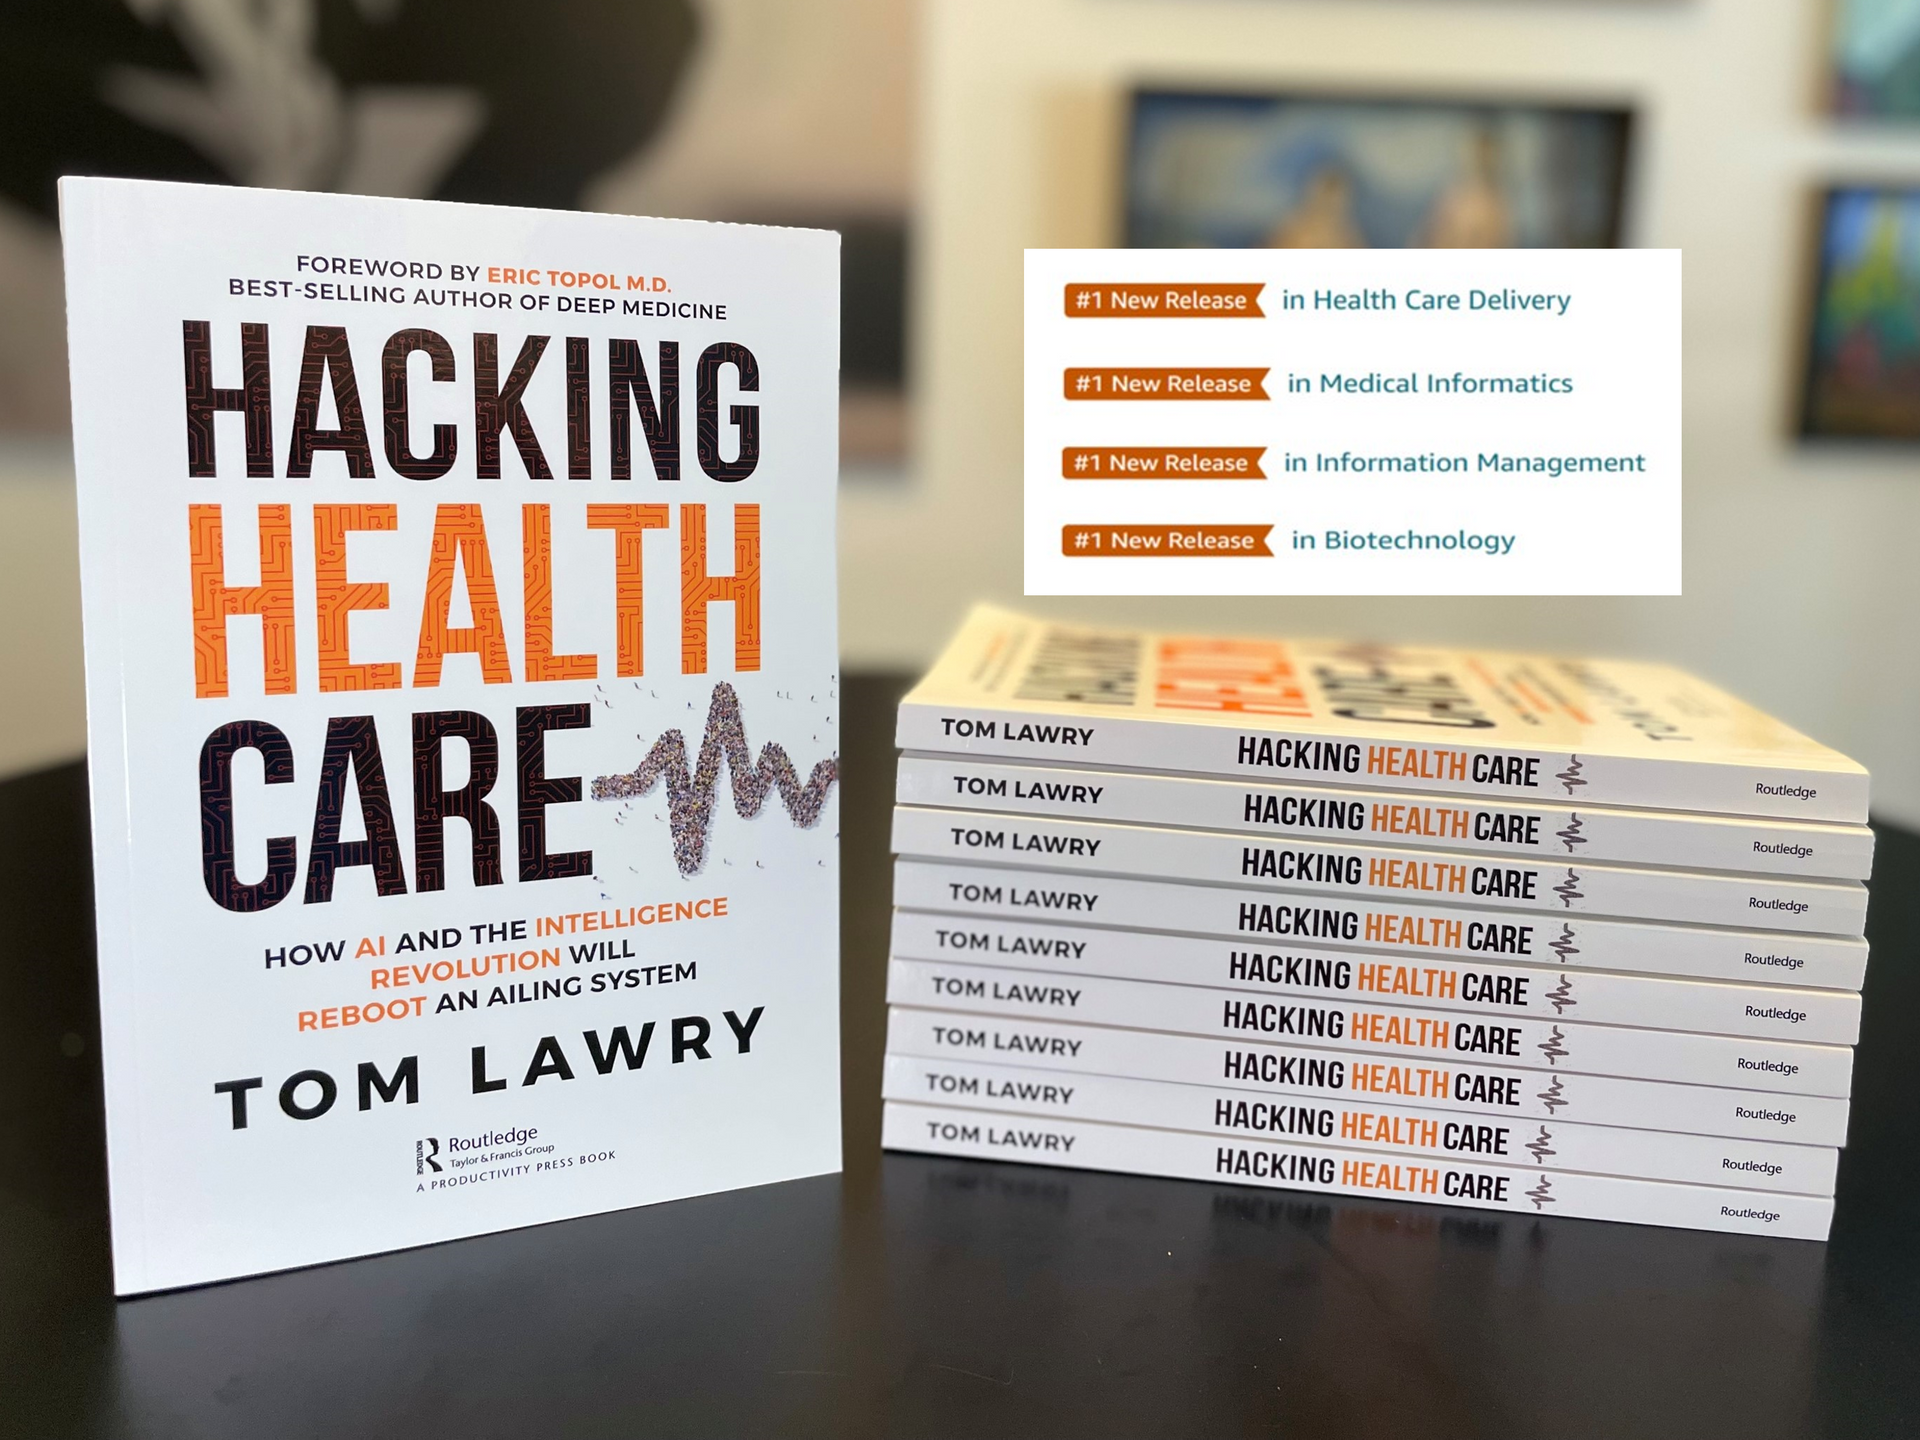 Hacking Healthcare by Tom Lawry